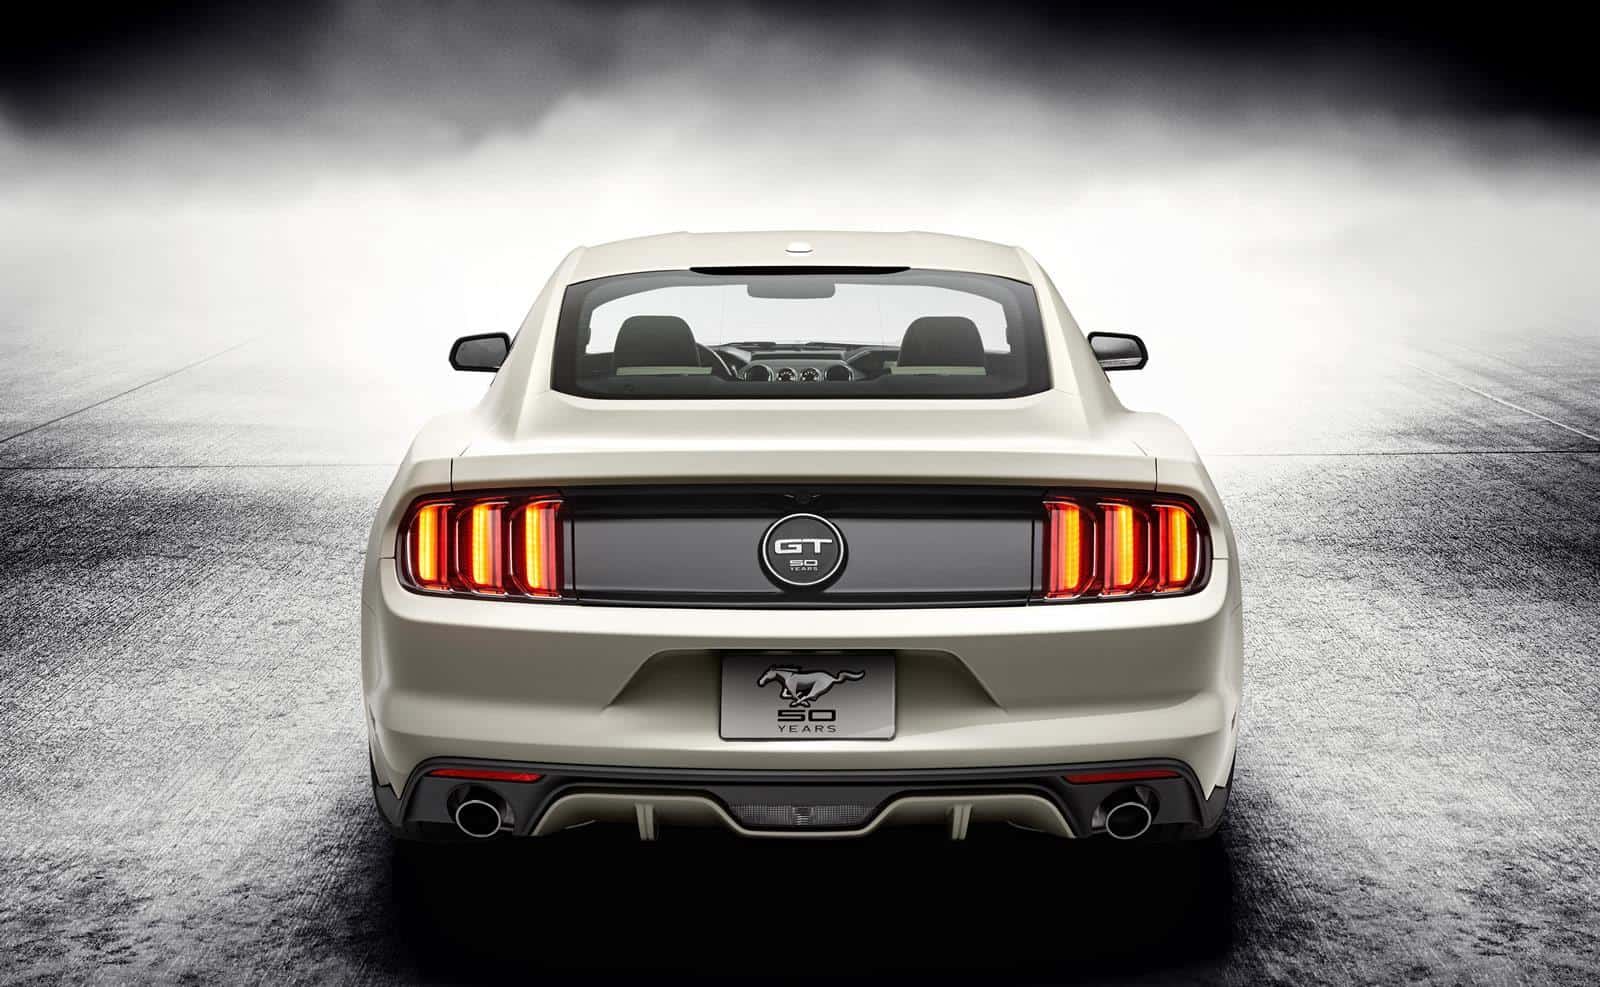 Ford-Mustang-50th-Anniversary-Limited-Edition 31